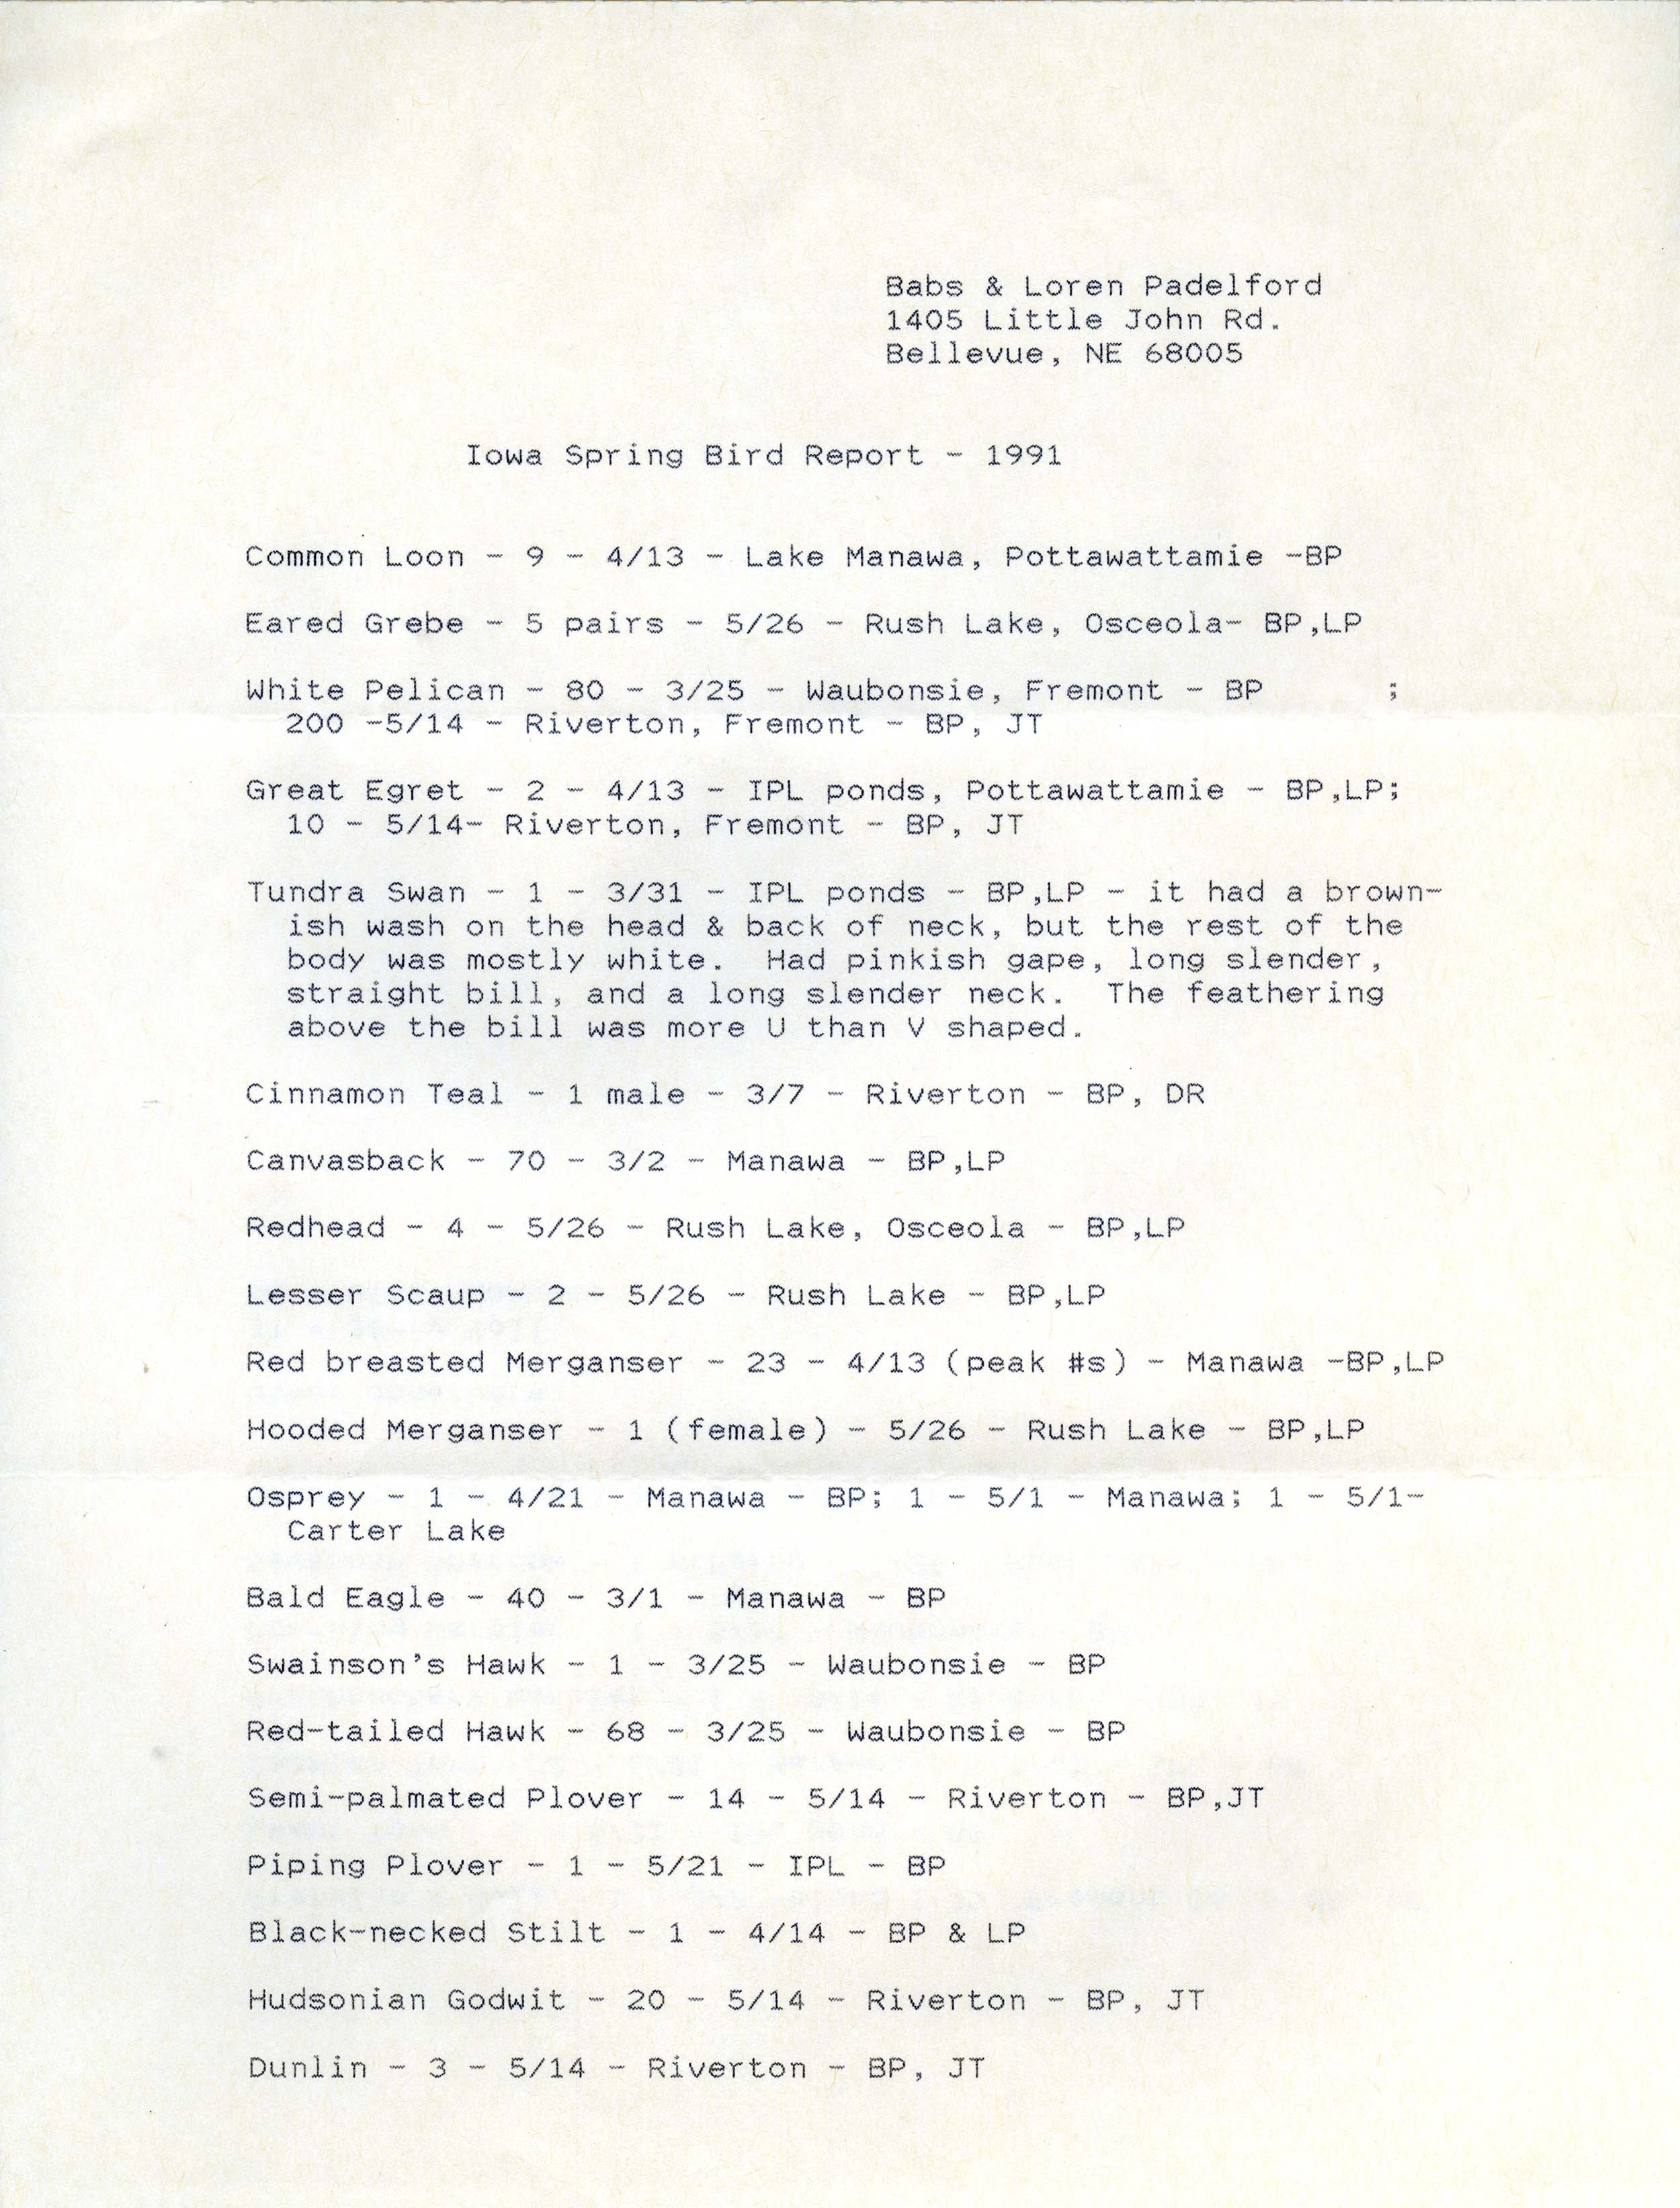 Field reports, Babs and Loren Padelford, spring 1991